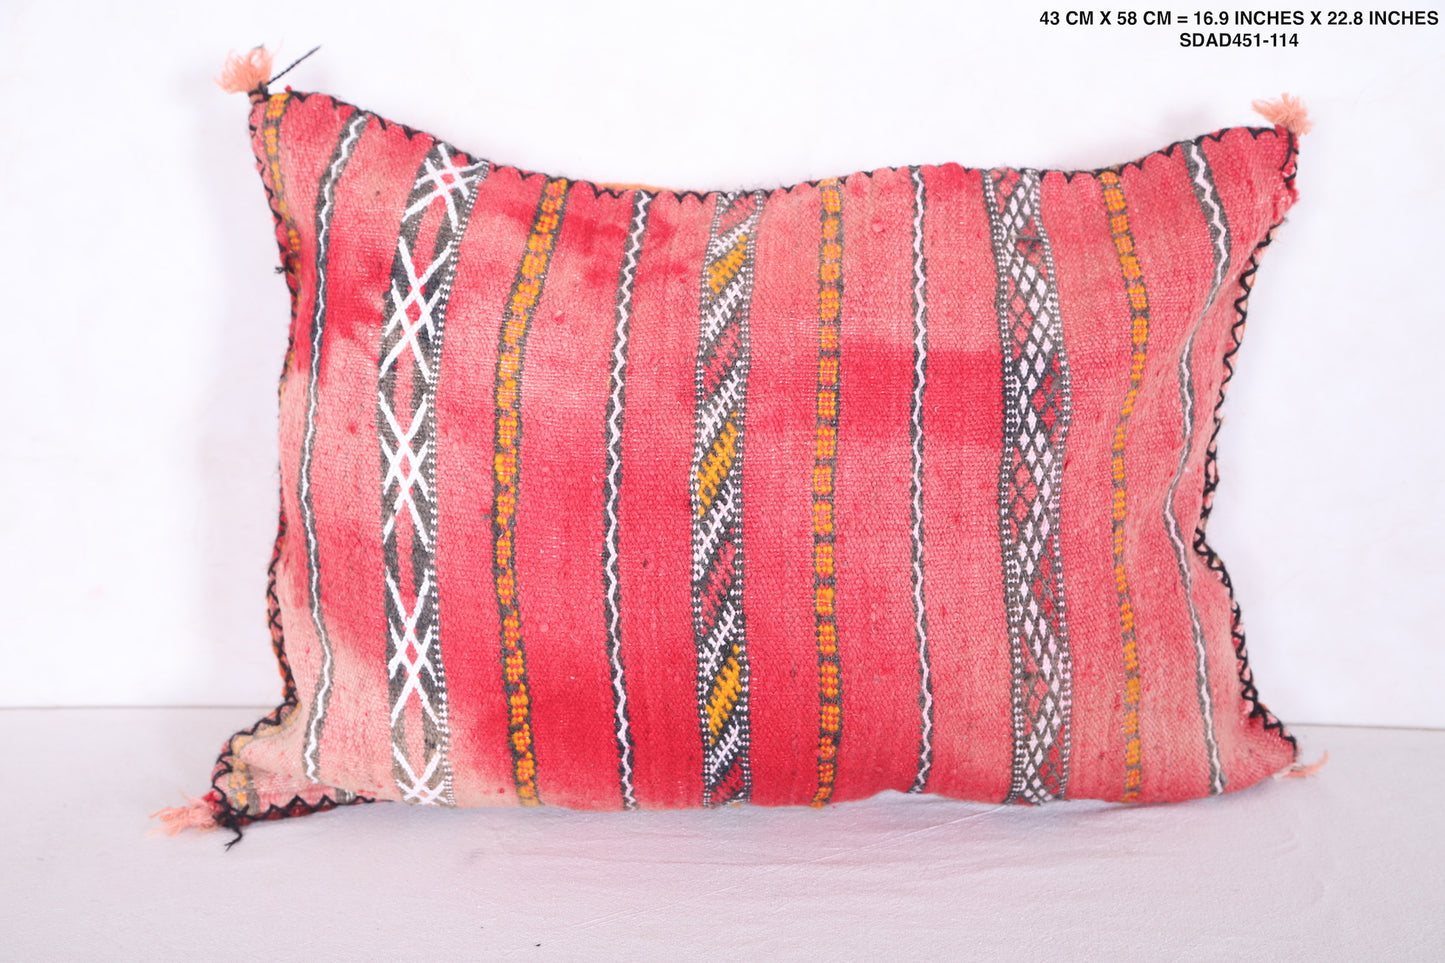 Moroccan handmade kilim pillow 16.9 INCHES X 22.8 INCHES